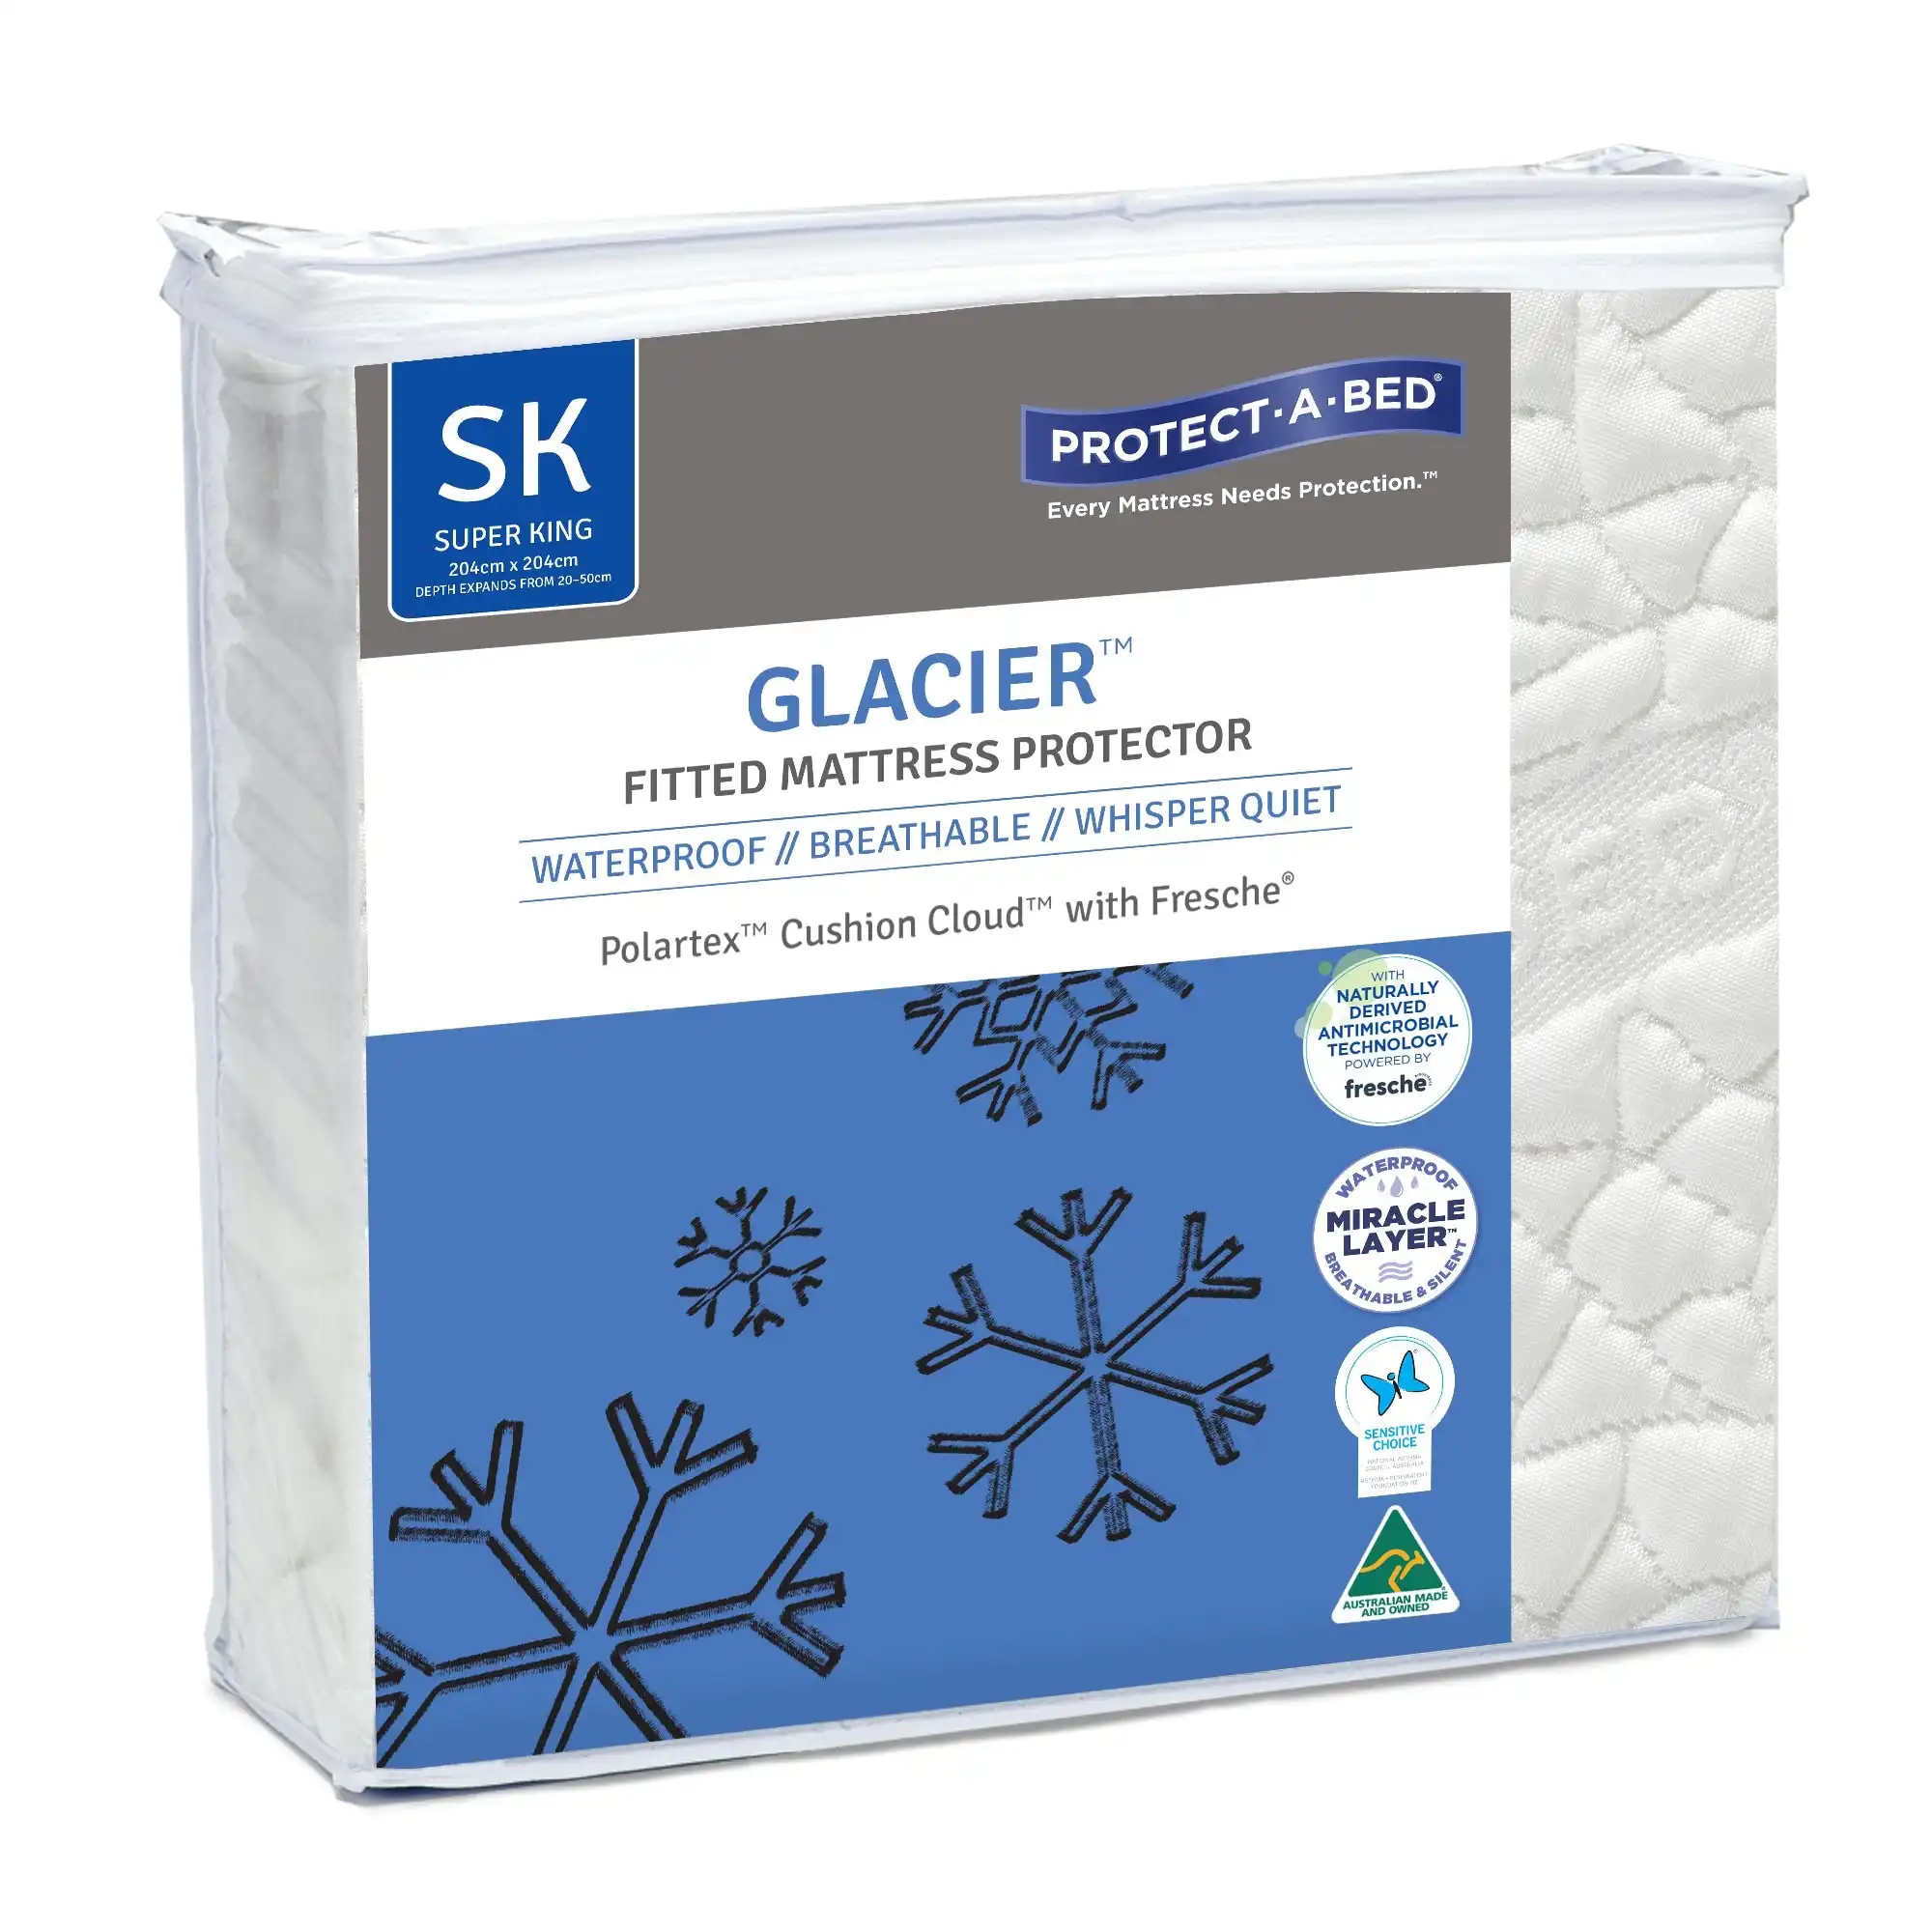 Protect A Bed Glacier Polartex Jacquard Fitted Waterproof Mattress & Pillow Protectors  ON SALE